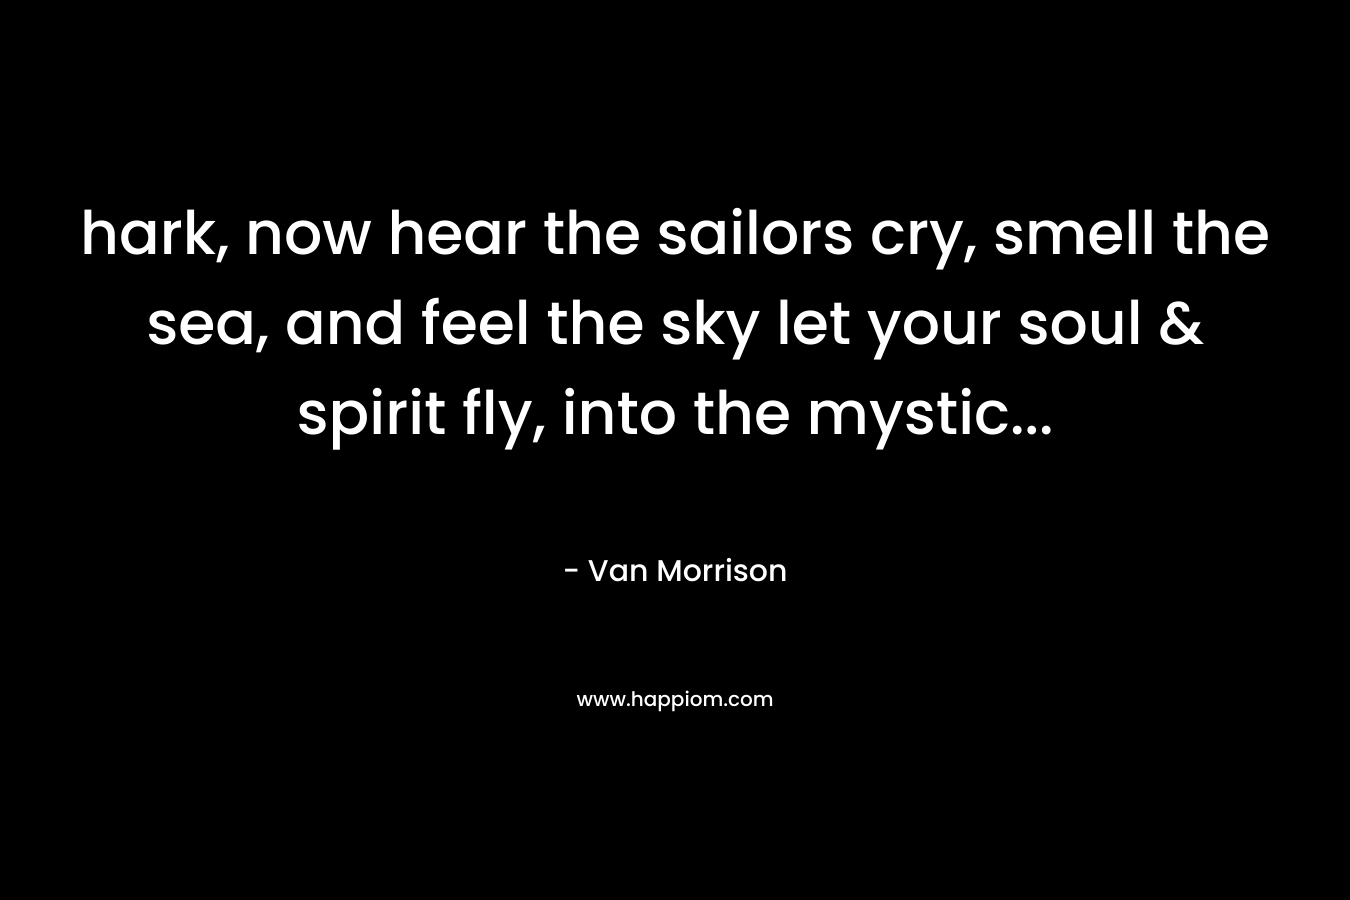 hark, now hear the sailors cry, smell the sea, and feel the sky let your soul & spirit fly, into the mystic...